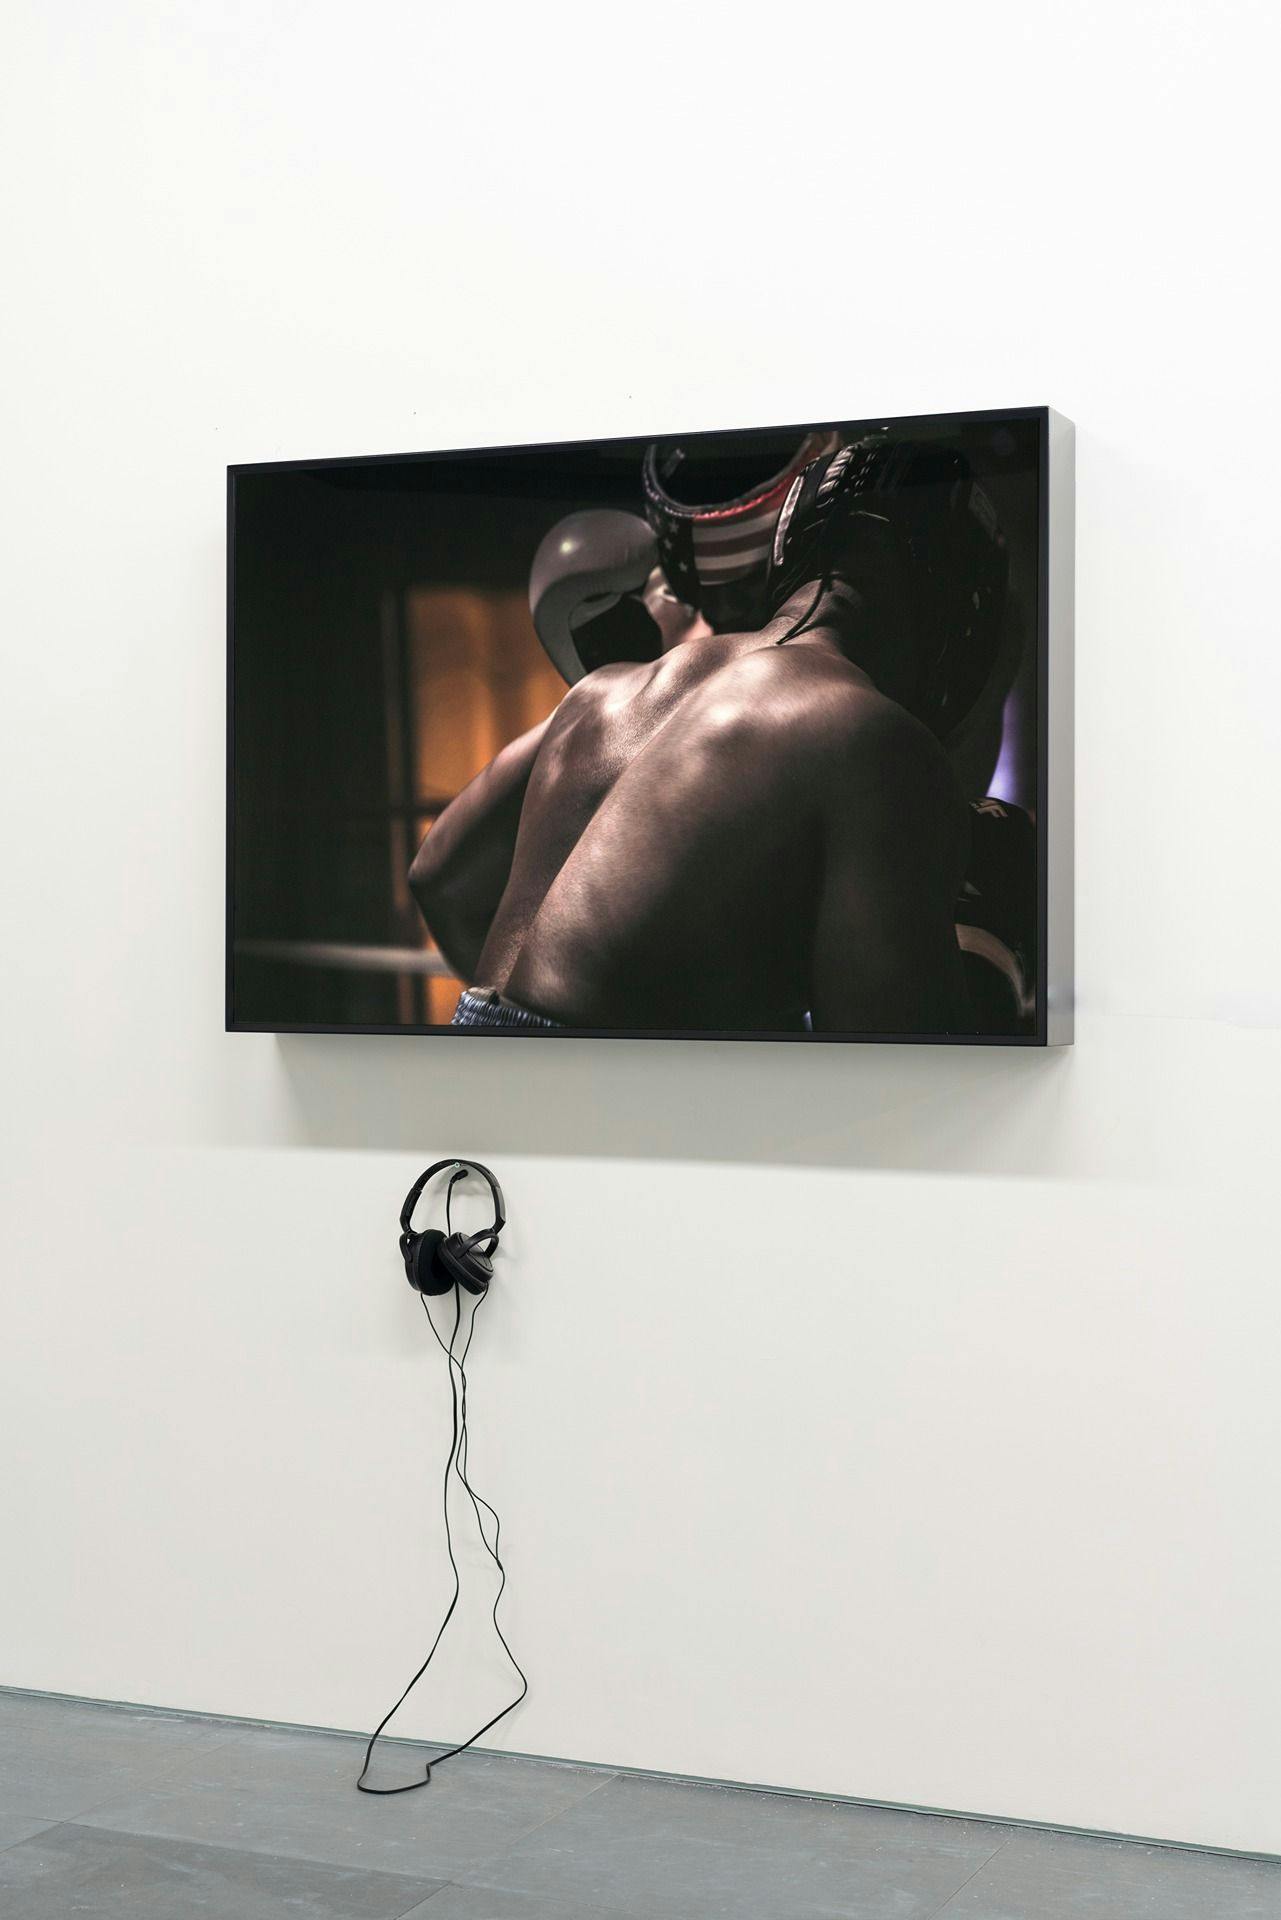 an image of a TV screen where two people are in a boxing embrace. There are headphones underneath the TV screen